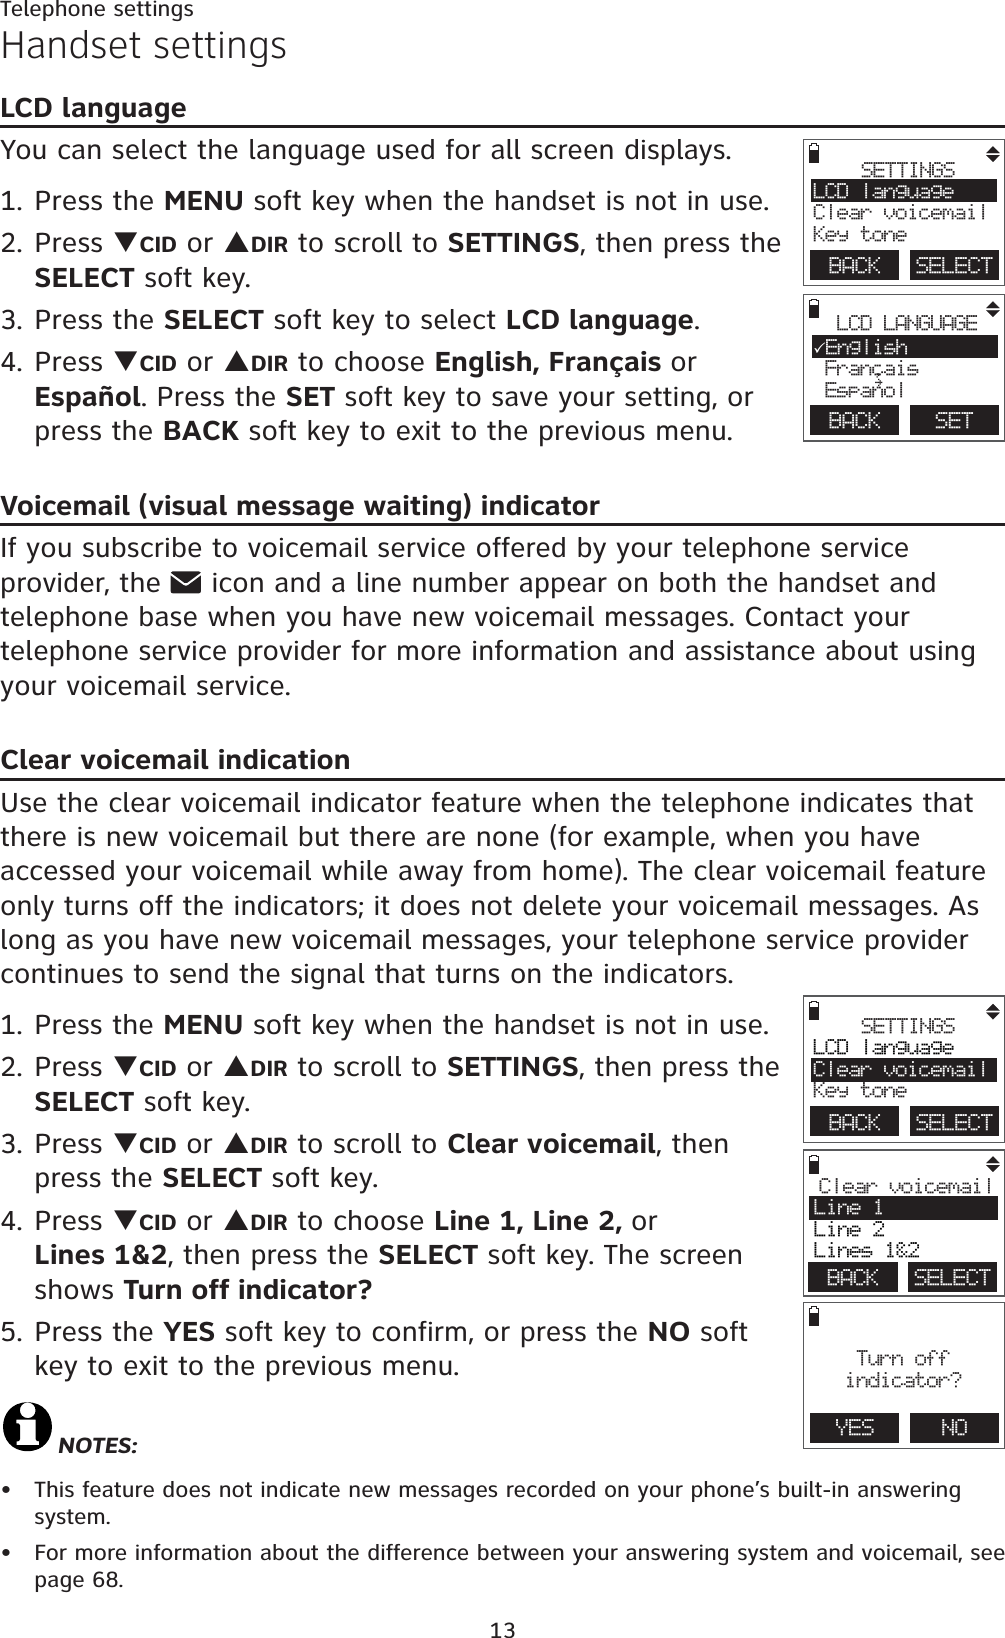 13Telephone settingsHandset settingsLCD languageYou can select the language used for all screen displays.1. Press the MENU soft key when the handset is not in use.2. Press TCID or SDIR to scroll to SETTINGS, then press the SELECT soft key.3. Press the SELECT soft key to select LCD language.4. Press TCID or SDIR to choose English, Français orEspañol. Press the SET soft key to save your setting, or press the BACK soft key to exit to the previous menu.Voicemail (visual message waiting) indicatorIf you subscribe to voicemail service offered by your telephone service provider, the   icon and a line number appear on both the handset and telephone base when you have new voicemail messages. Contact your telephone service provider for more information and assistance about using your voicemail service. Clear voicemail indicationUse the clear voicemail indicator feature when the telephone indicates that there is new voicemail but there are none (for example, when you have accessed your voicemail while away from home). The clear voicemail feature only turns off the indicators; it does not delete your voicemail messages. As long as you have new voicemail messages, your telephone service provider continues to send the signal that turns on the indicators.1. Press the MENU soft key when the handset is not in use.2. Press TCID or SDIR to scroll to SETTINGS, then press the SELECT soft key.3. Press TCID or SDIR to scroll to Clear voicemail, then press the SELECT soft key.4. Press TCID or SDIR to choose Line 1, Line 2, orLines 1&amp;2, then press the SELECT soft key. The screen shows Turn off indicator?5. Press the YES soft key to confirm, or press the NO soft key to exit to the previous menu.NOTES: This feature does not indicate new messages recorded on your phone’s built-in answering system.For more information about the difference between your answering system and voicemail, see page 68.••BACK    SELECTSETTINGSLCD languageClear voicemailKey toneYES    NOTurn offindicator?Clear voicemail Line 1Line 2Lines 1&amp;2BACK    SELECTBACK    SELECTSETTINGSLCD languageClear voicemailKey toneBACK    SETLCD LANGUAGE3EnglishFrancais Espanol,~